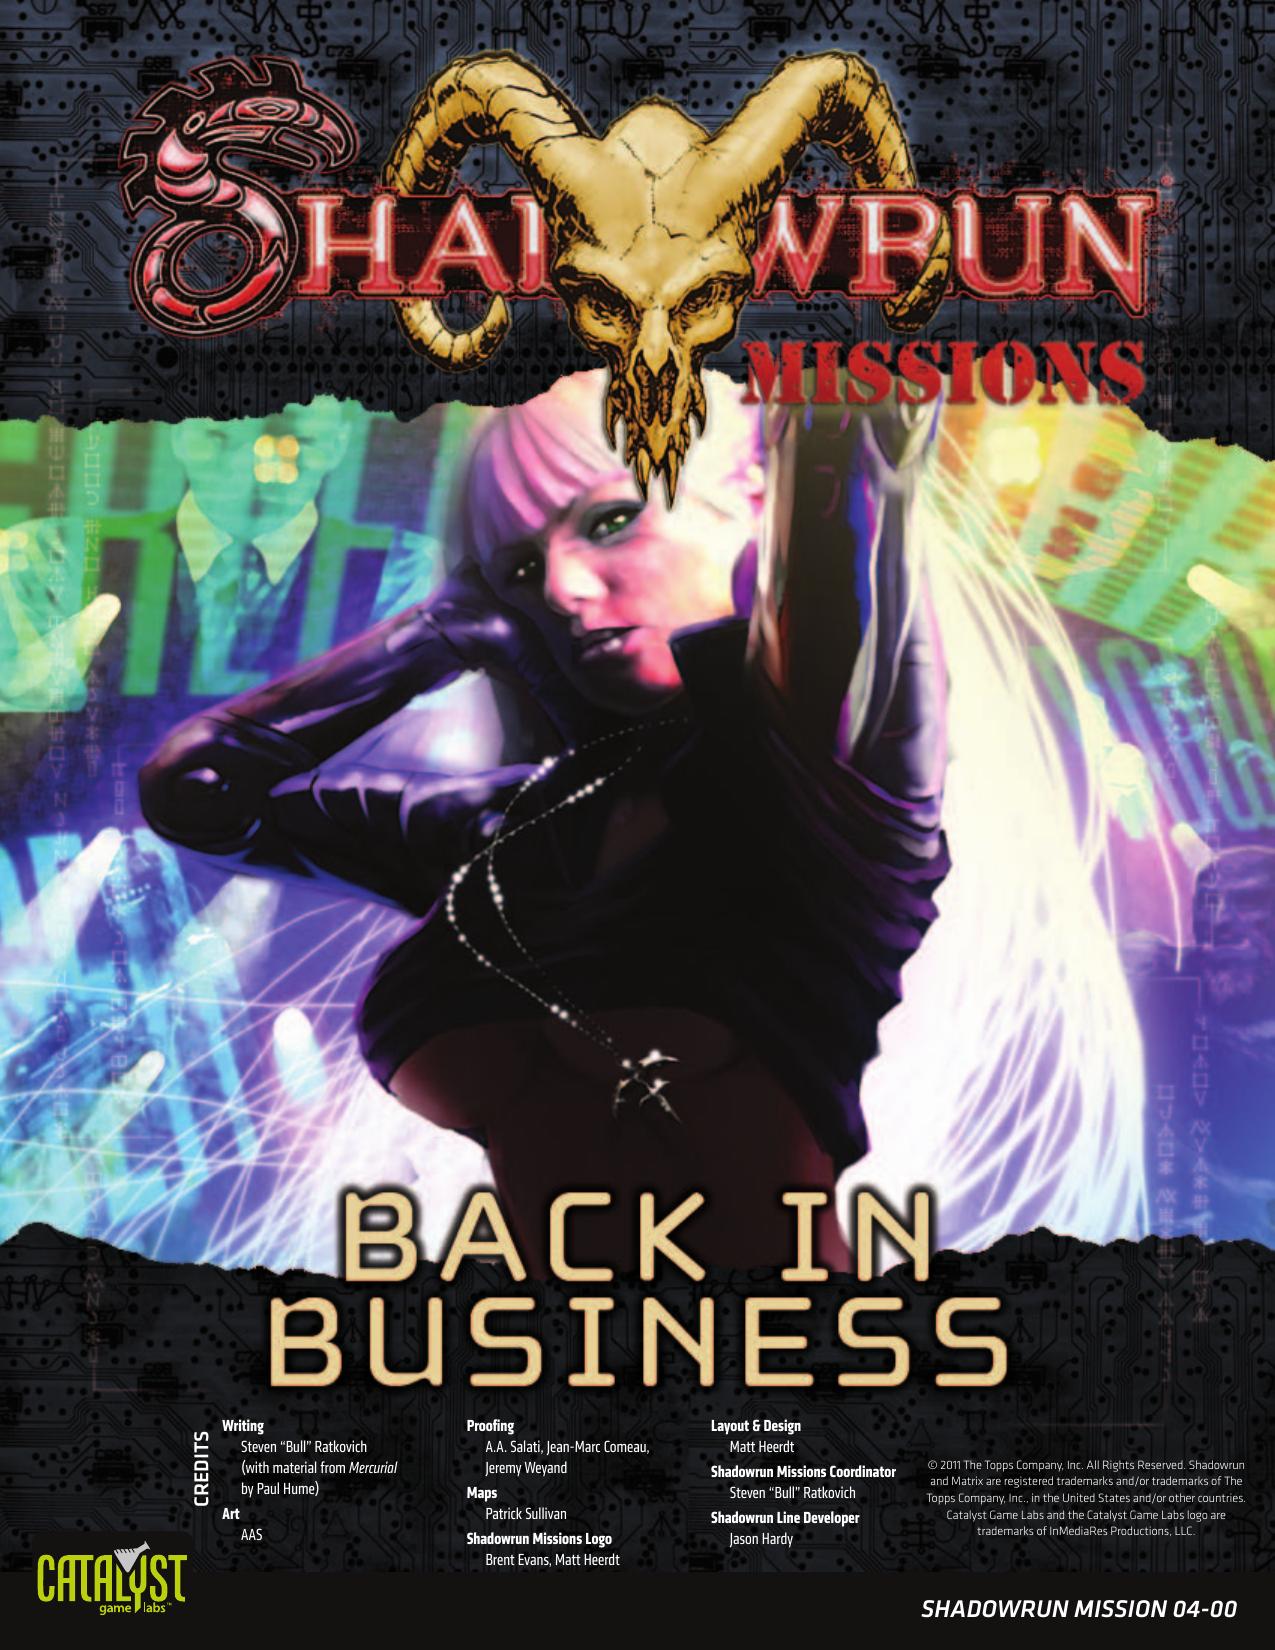 Shadowrun Missions: Back in Business (04-00)